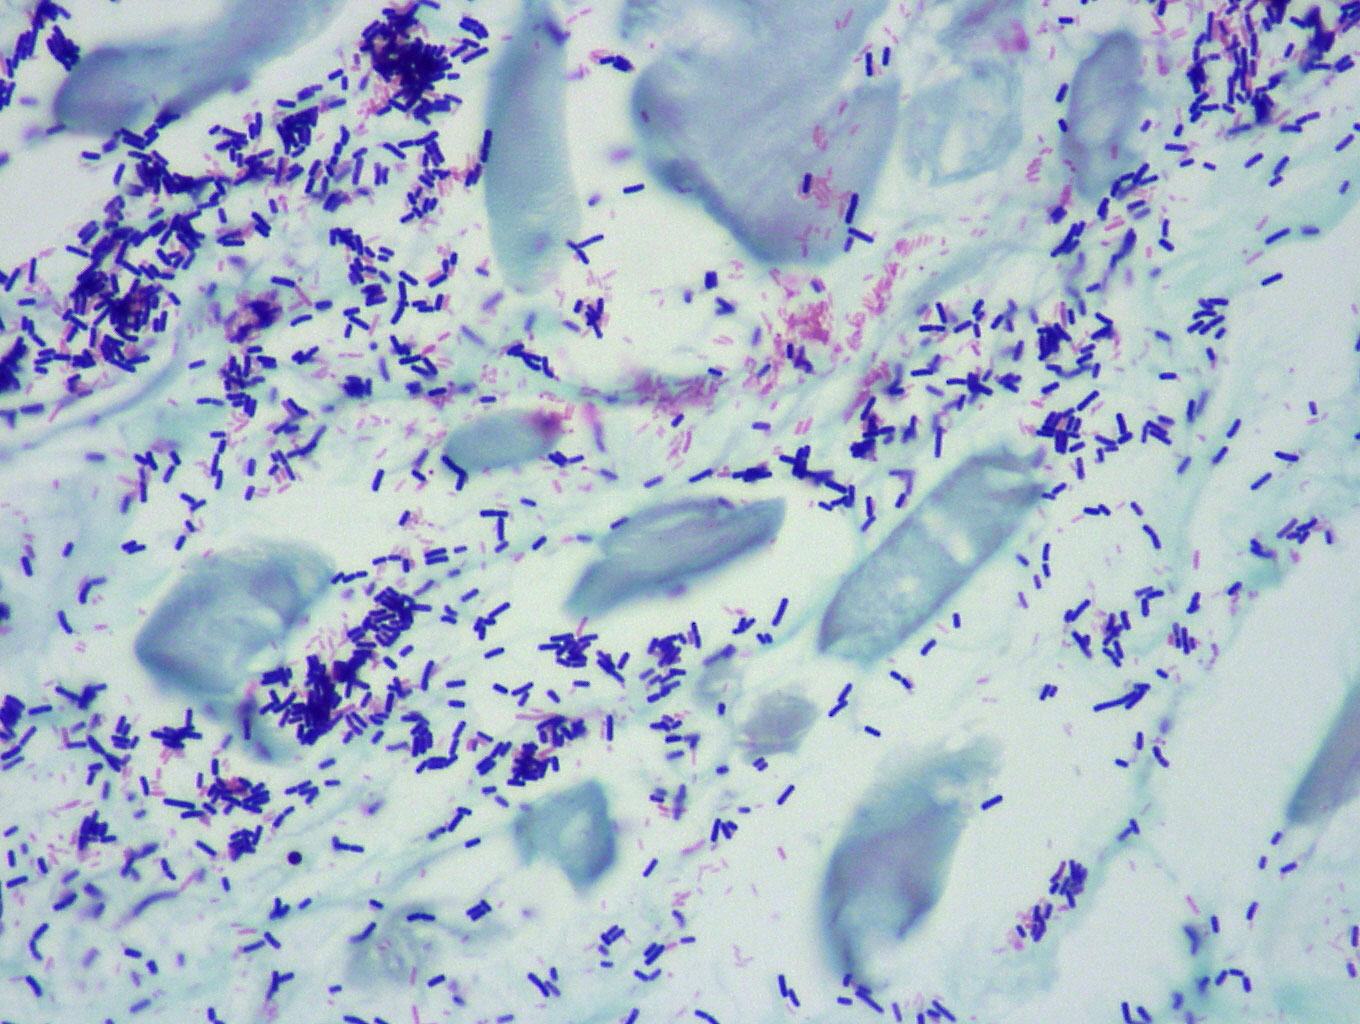 Gram positive and negative staining